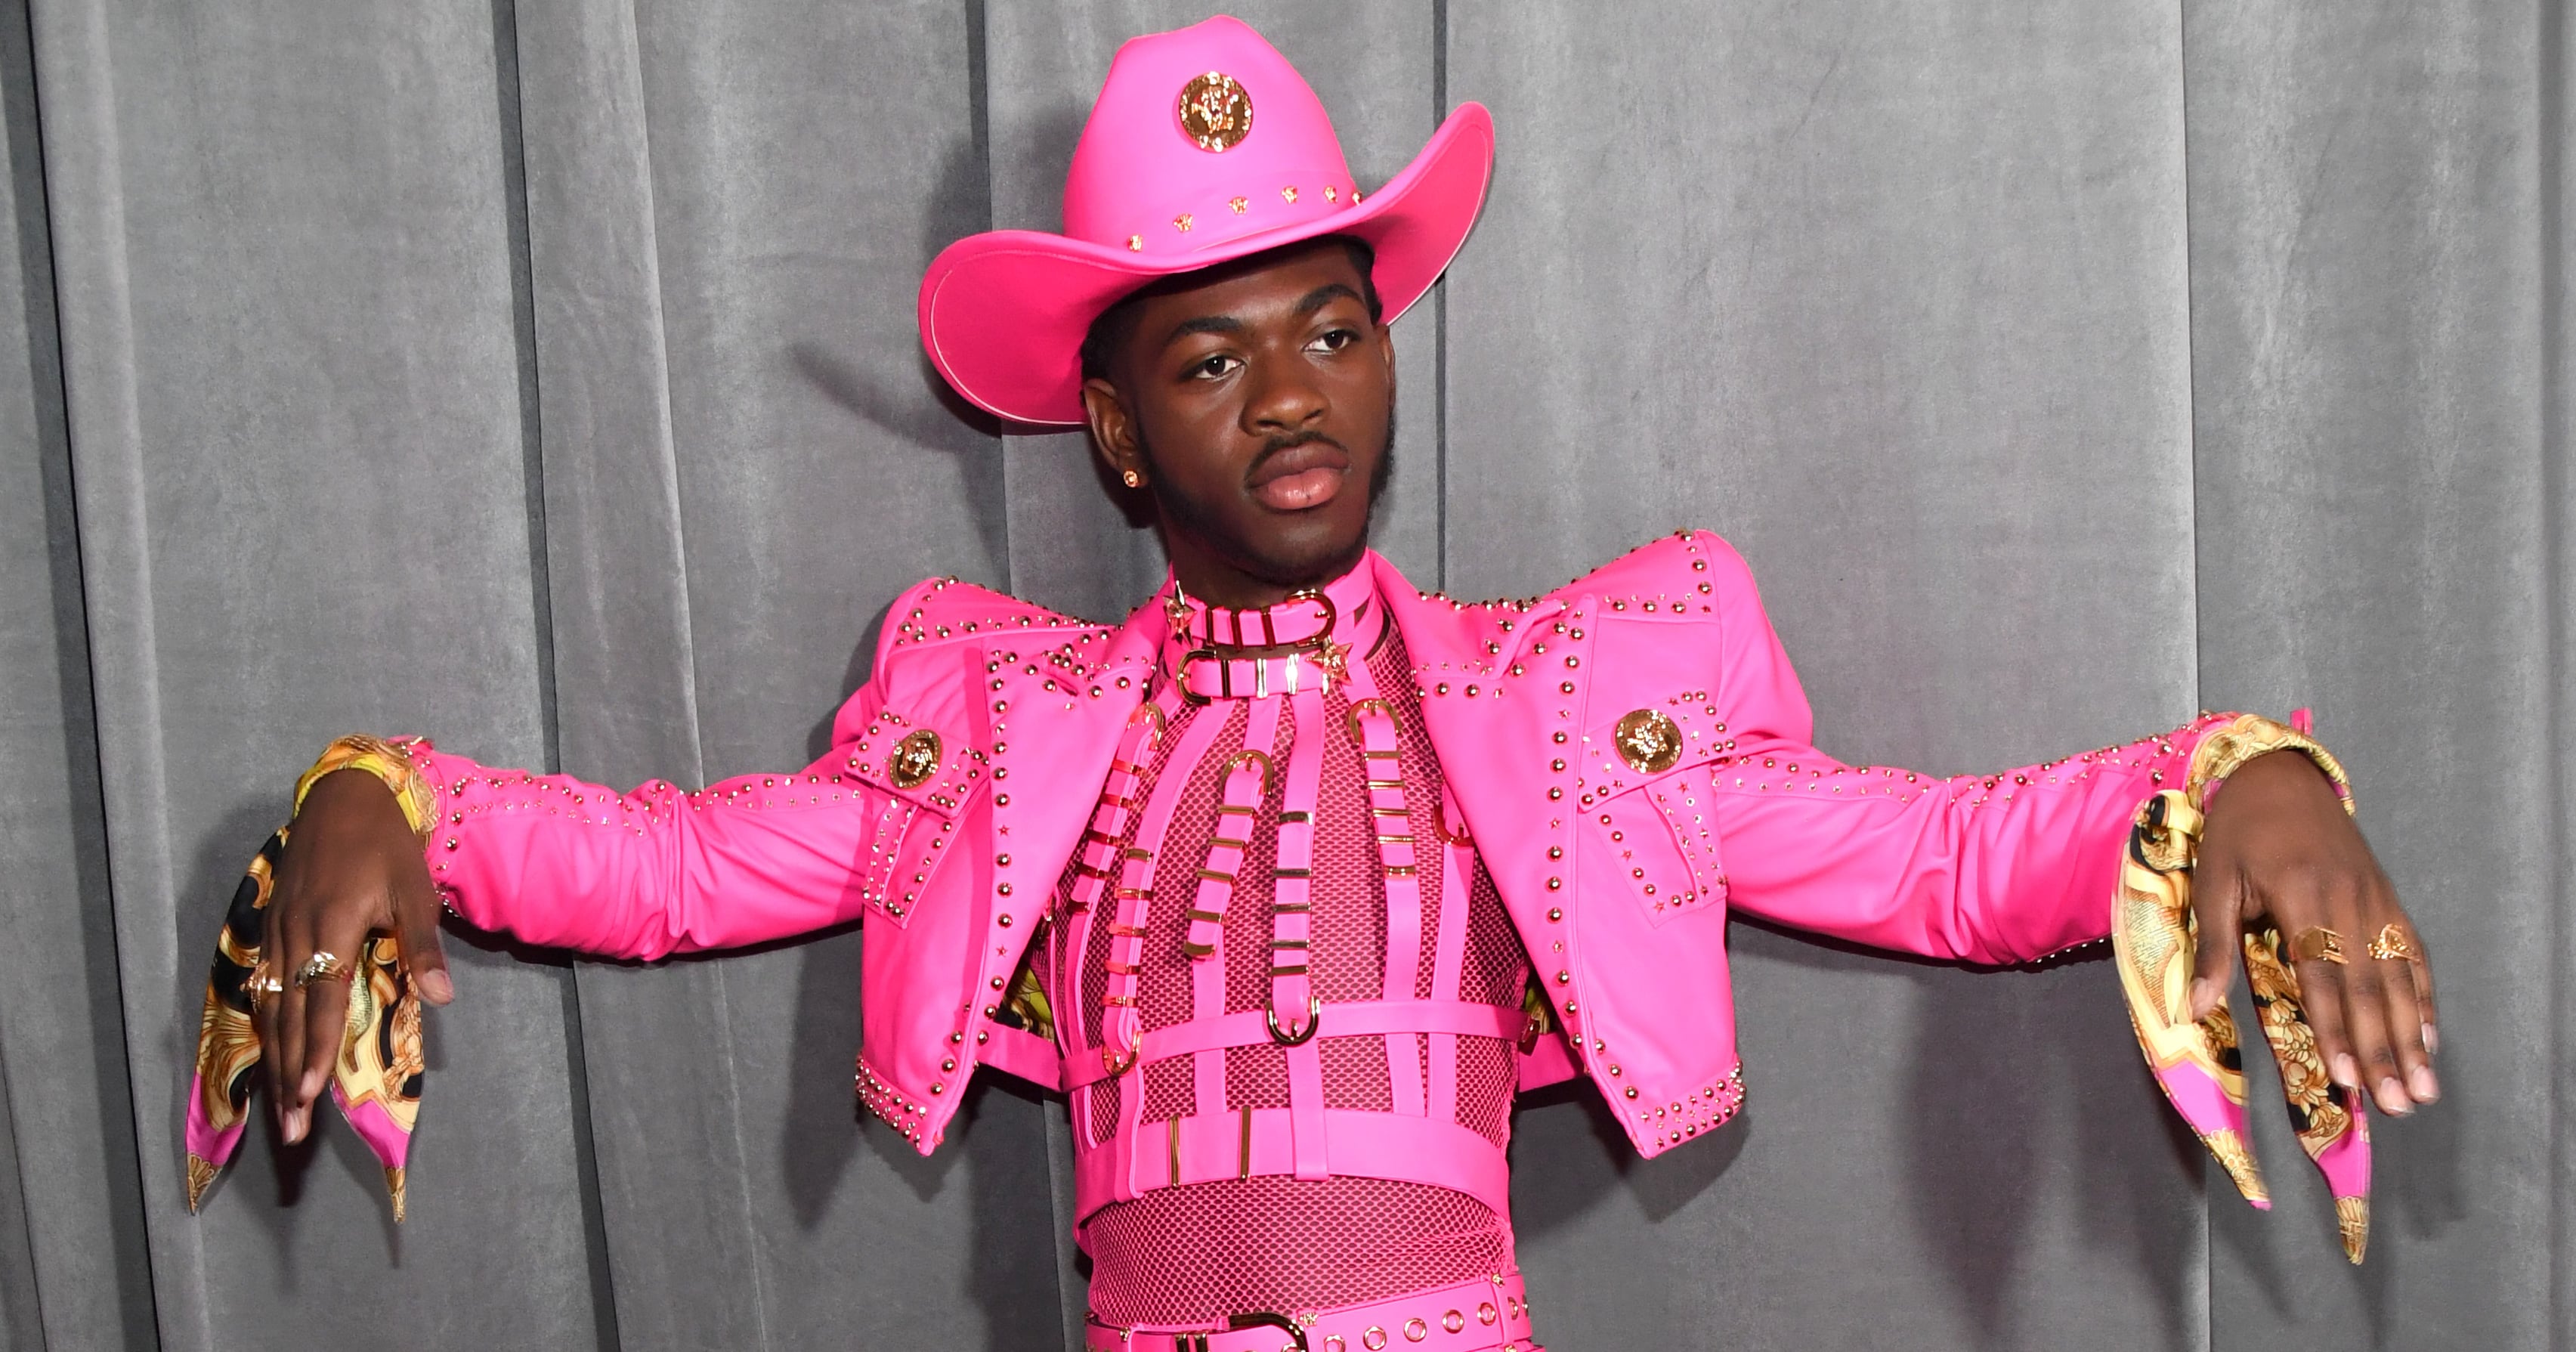 Lil Nas X's Pink Versace Cowboy Outfit at the Grammys 2020